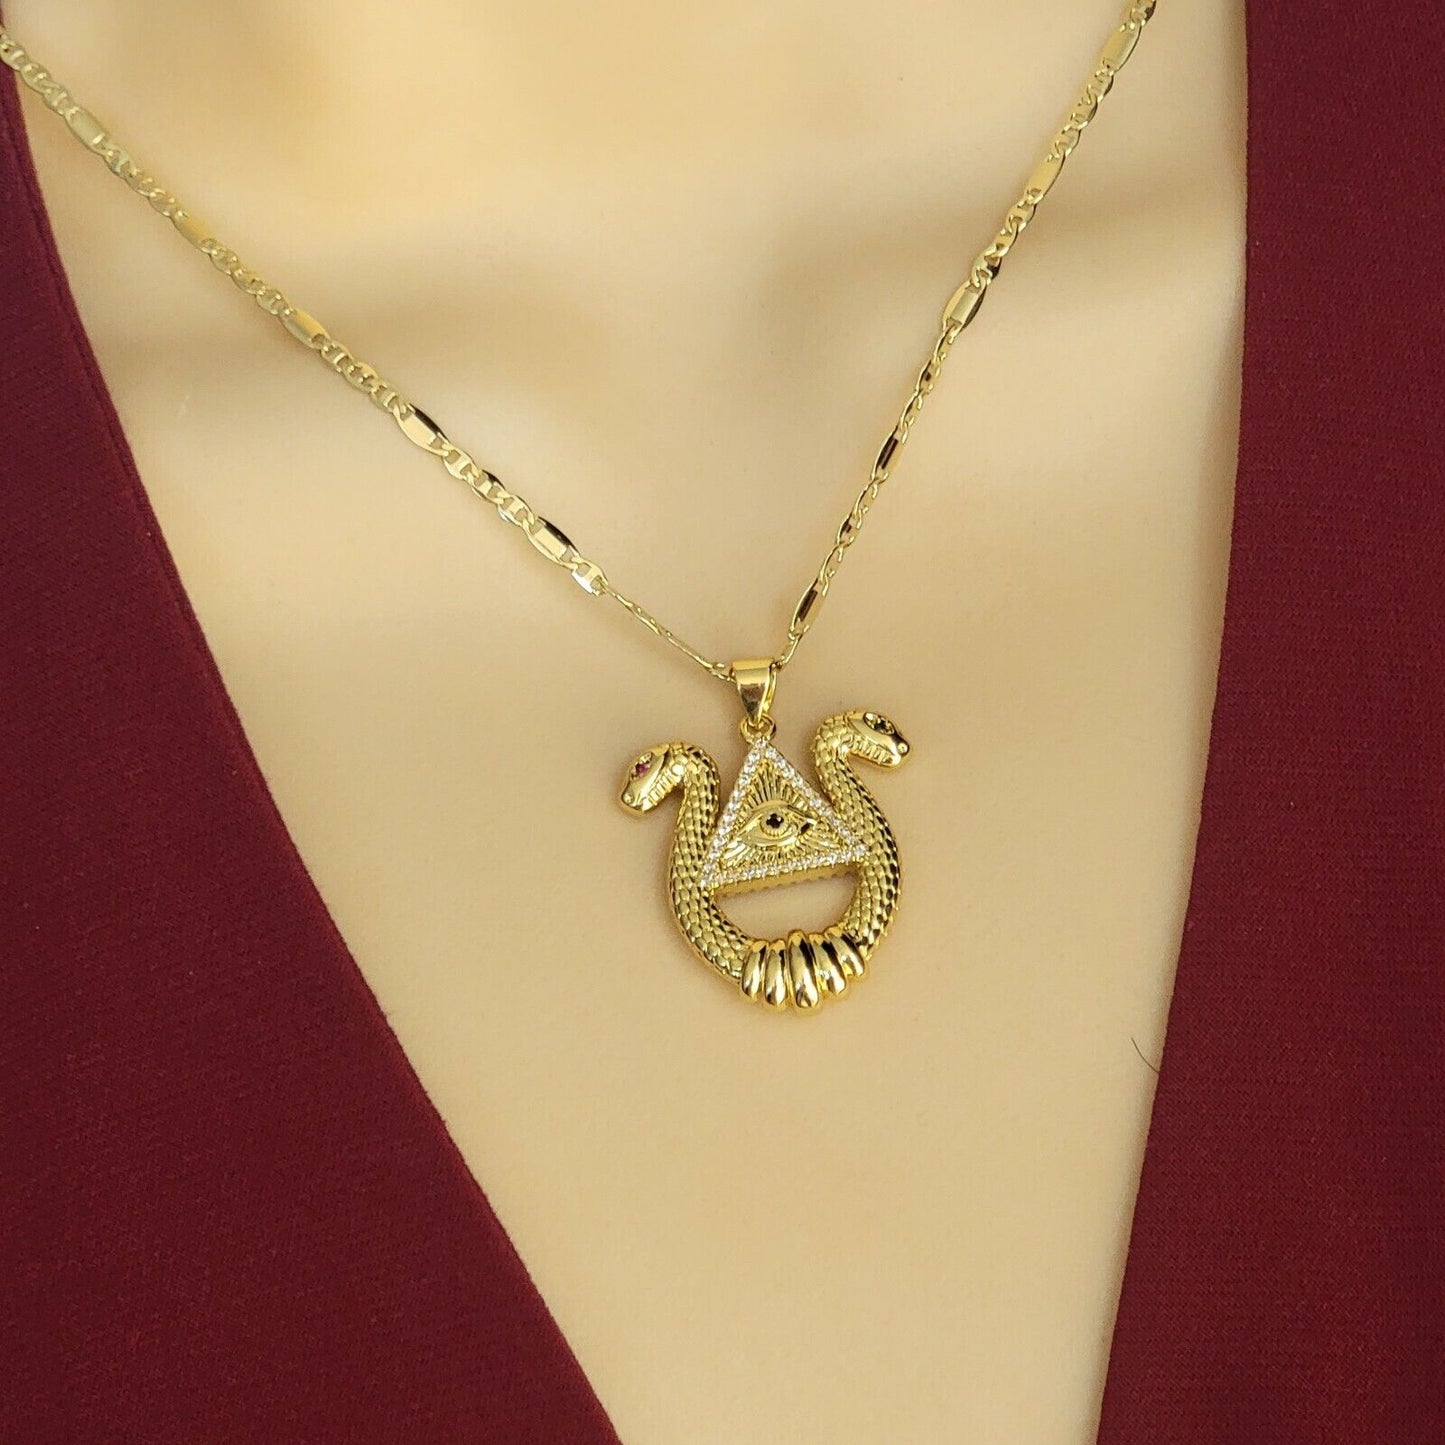 Necklaces - 14K Gold Plated. Double Head Snake Eye Providence Divine Vision Pendant & Chain.